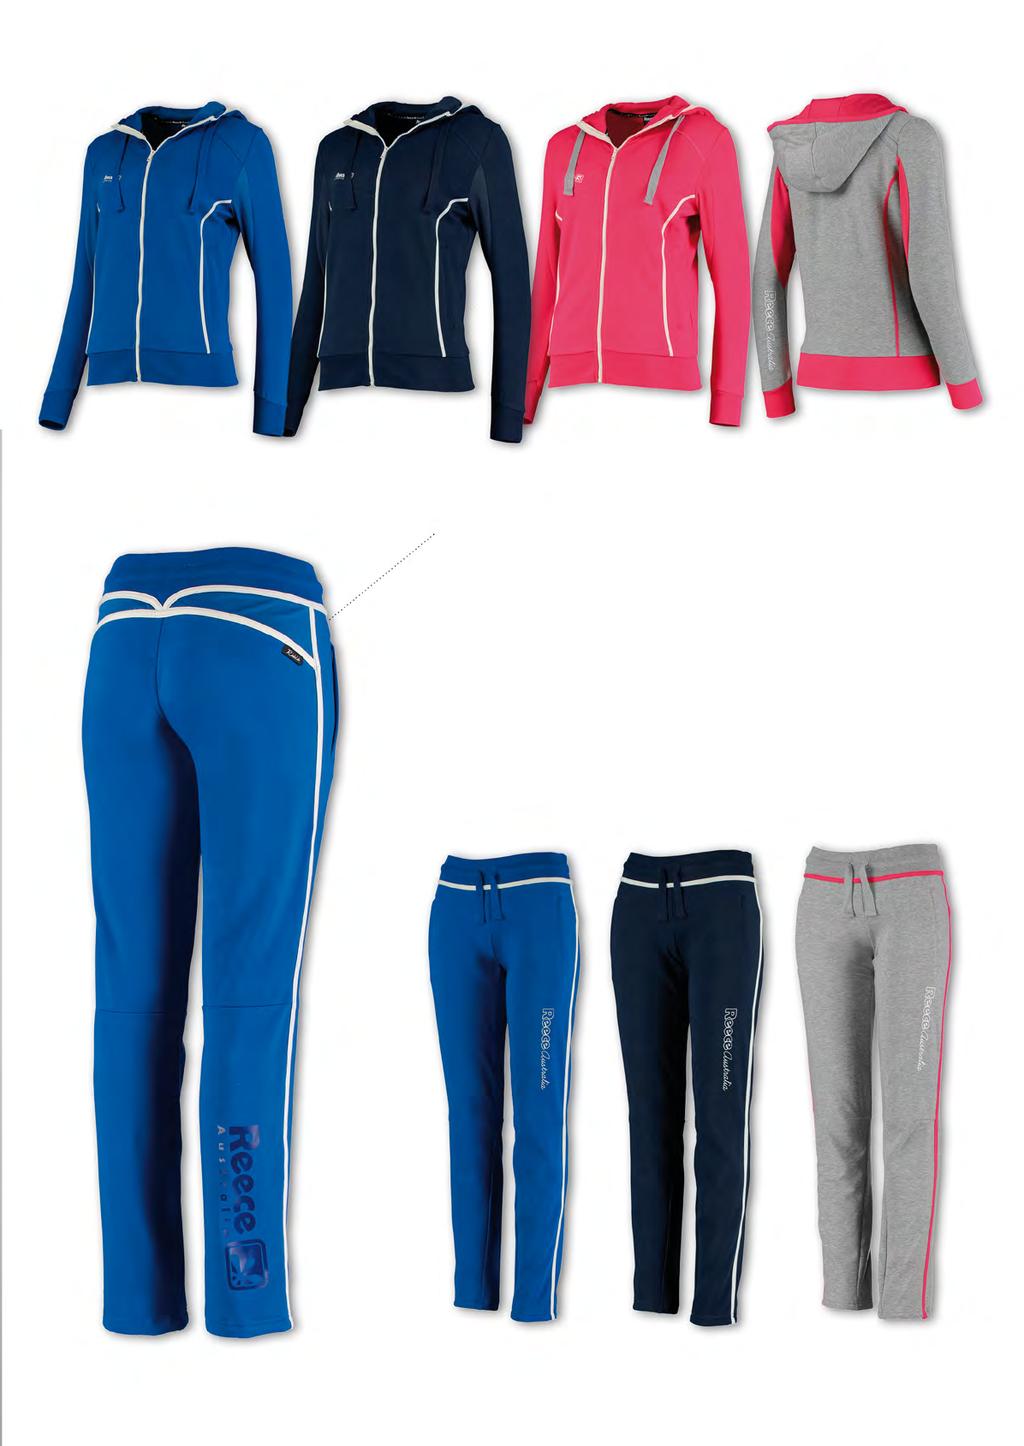 royal - white 865602-5200 navy - white 865602-7200 pink - white 865602-0550 grey - pink 865602-9310 ComfortTec LOGO HIGH COMFORT technical COMFORT STRETCH EASY PRINTING KATE SWEAT PANTS // LADIES